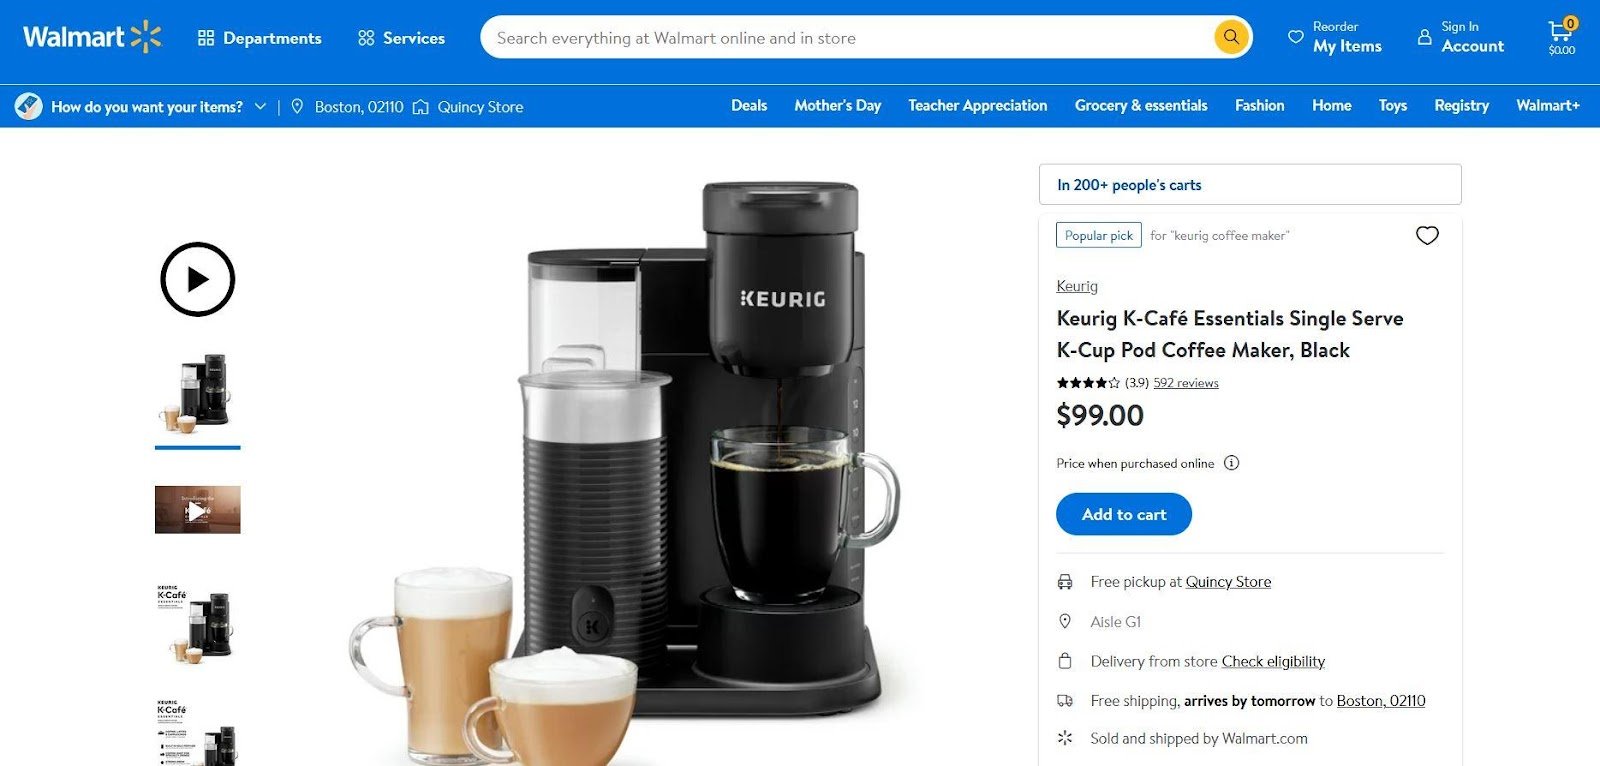 Walmart Product Page Keurig Coffee Machine Interactive Walkthrough Product Page Guide Salsify Salsify Product Pages Product Detail Page Examples